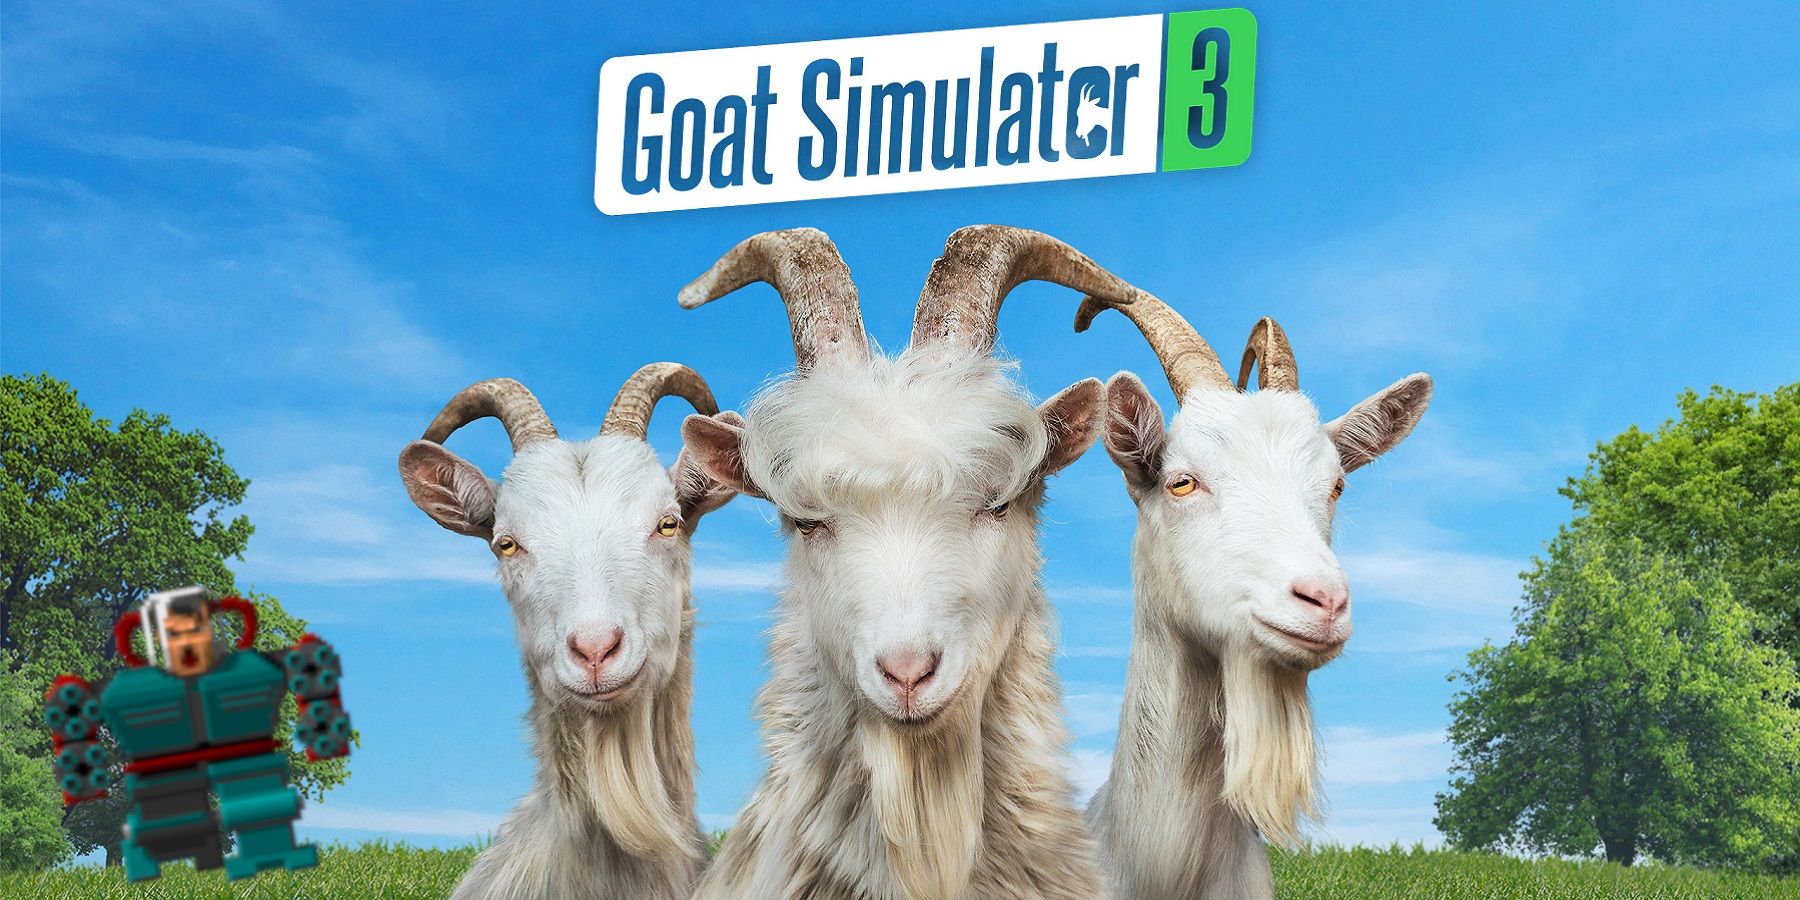 Image from Goat Simulator 3 showing three goats with Wolfenstein 3D's Mechahitler in the background.